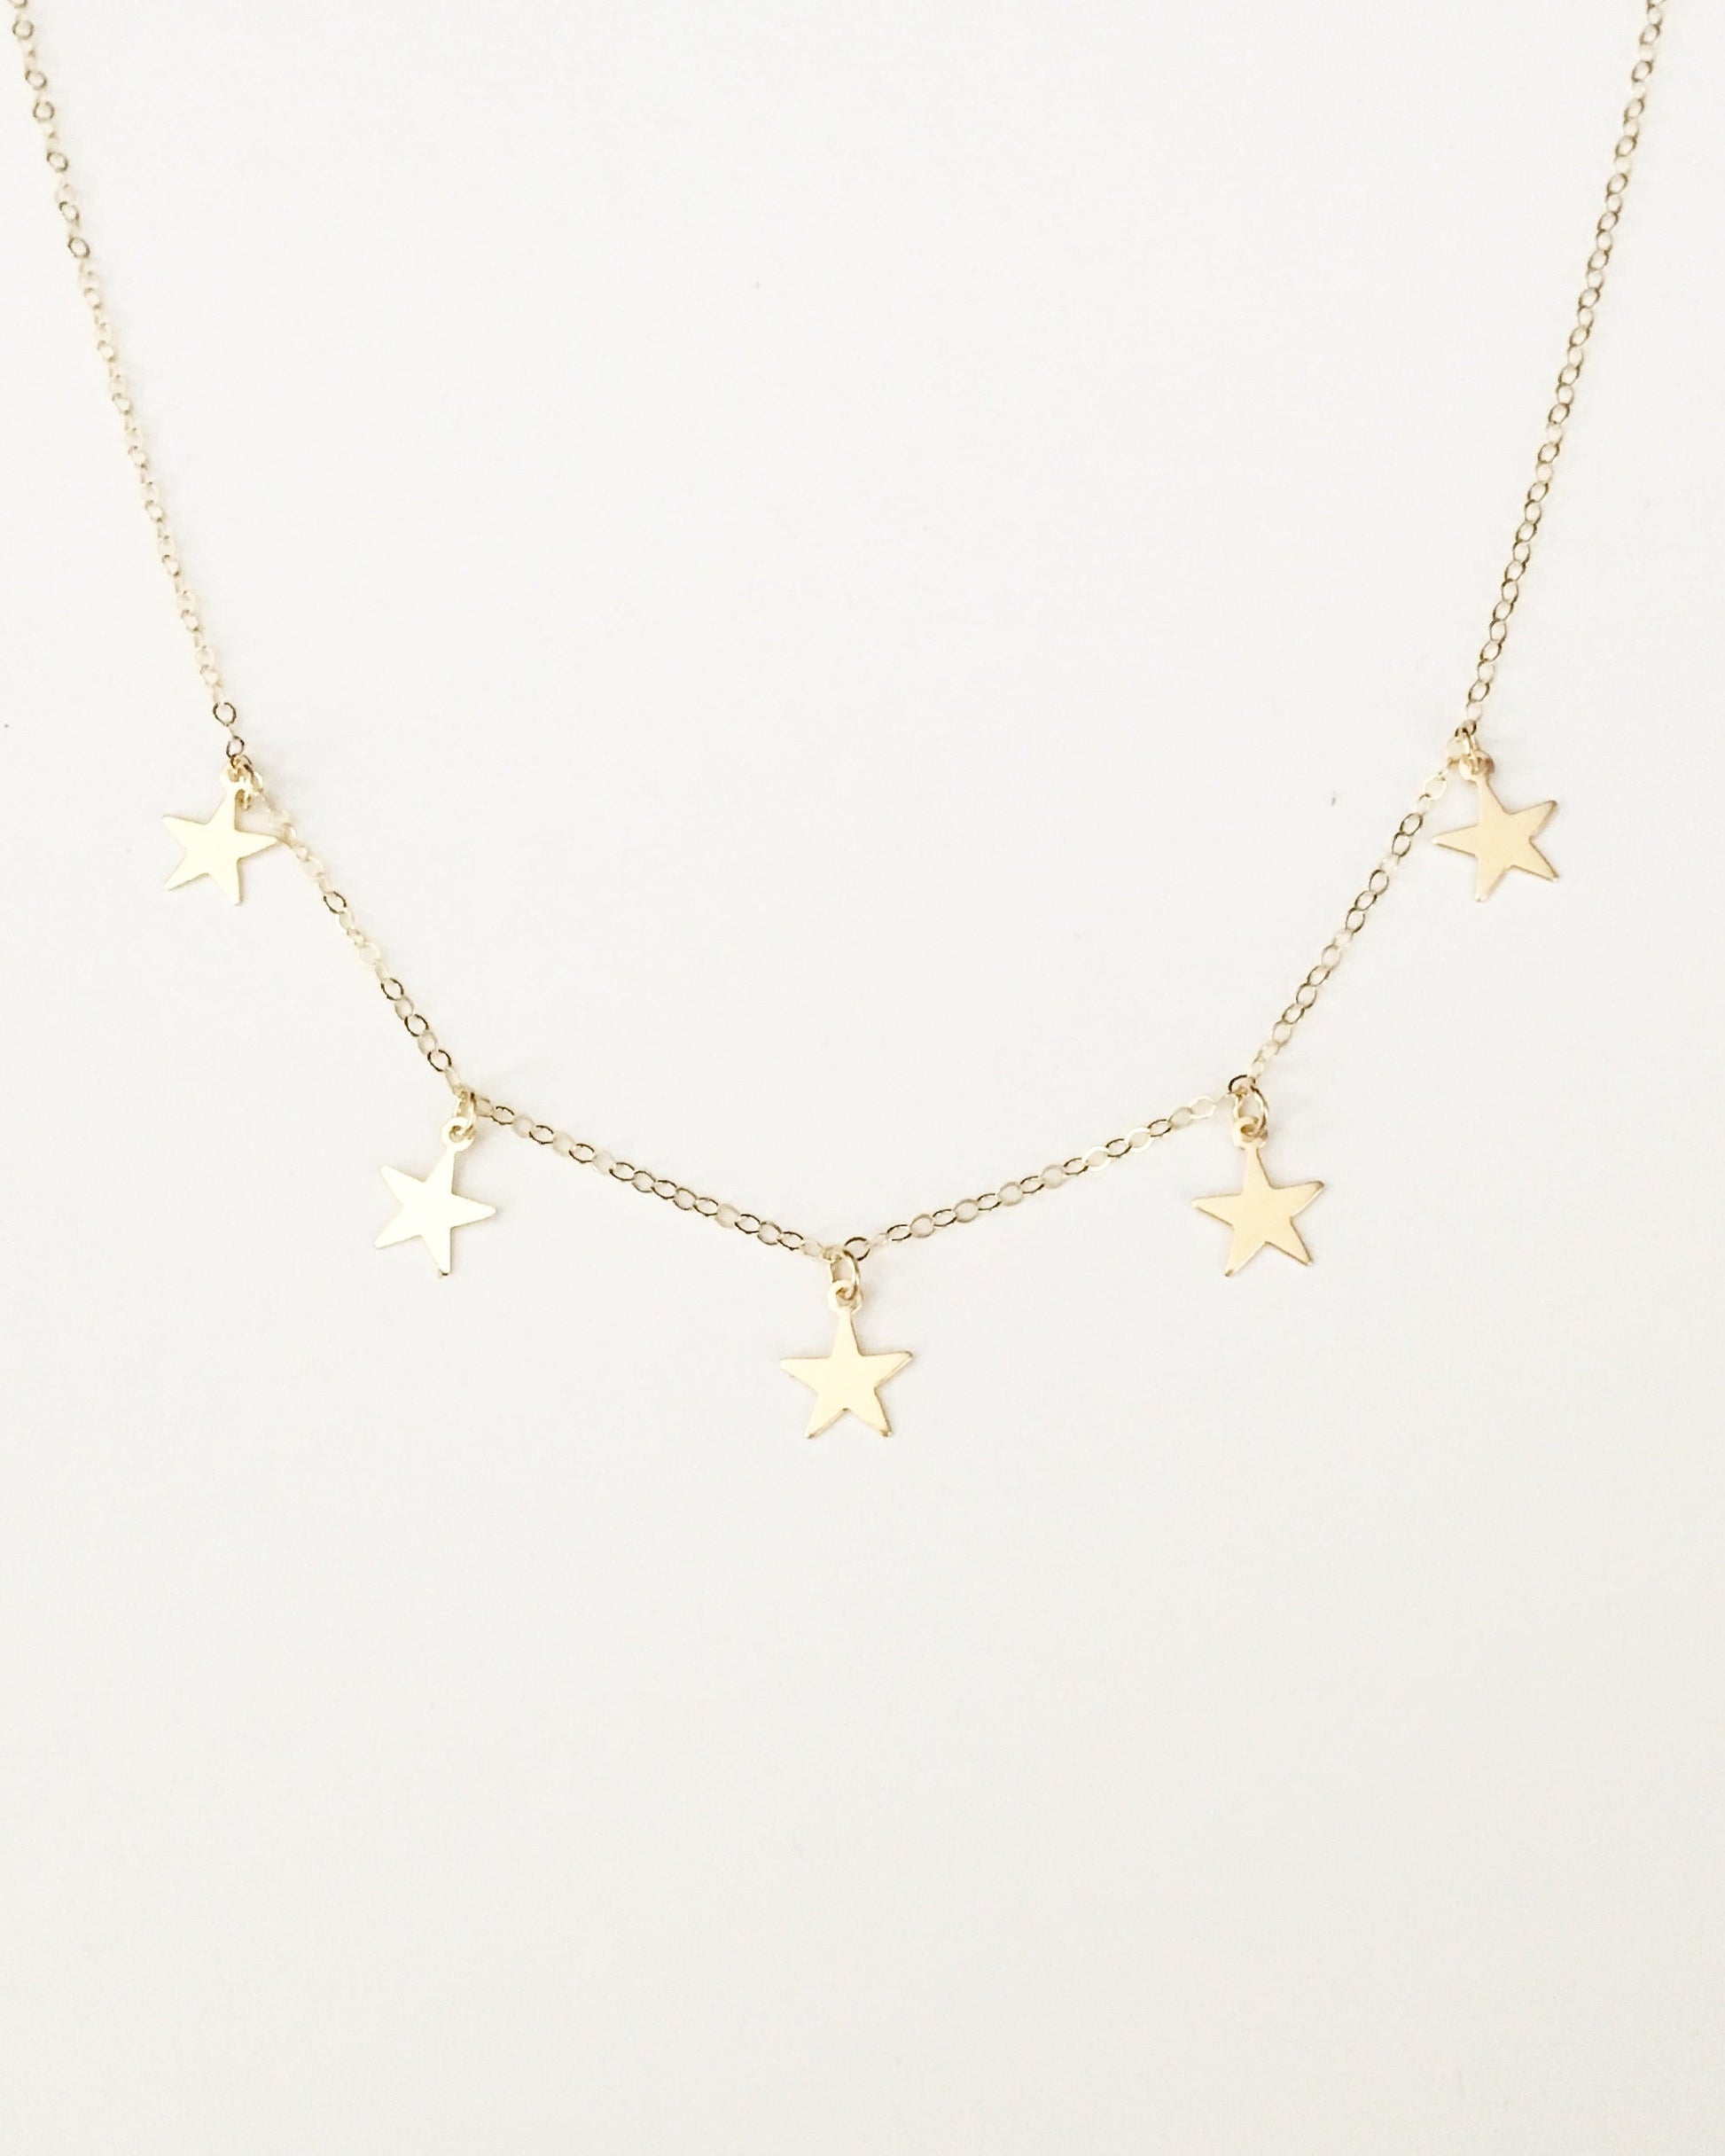 Gold or Silver Stars Necklace